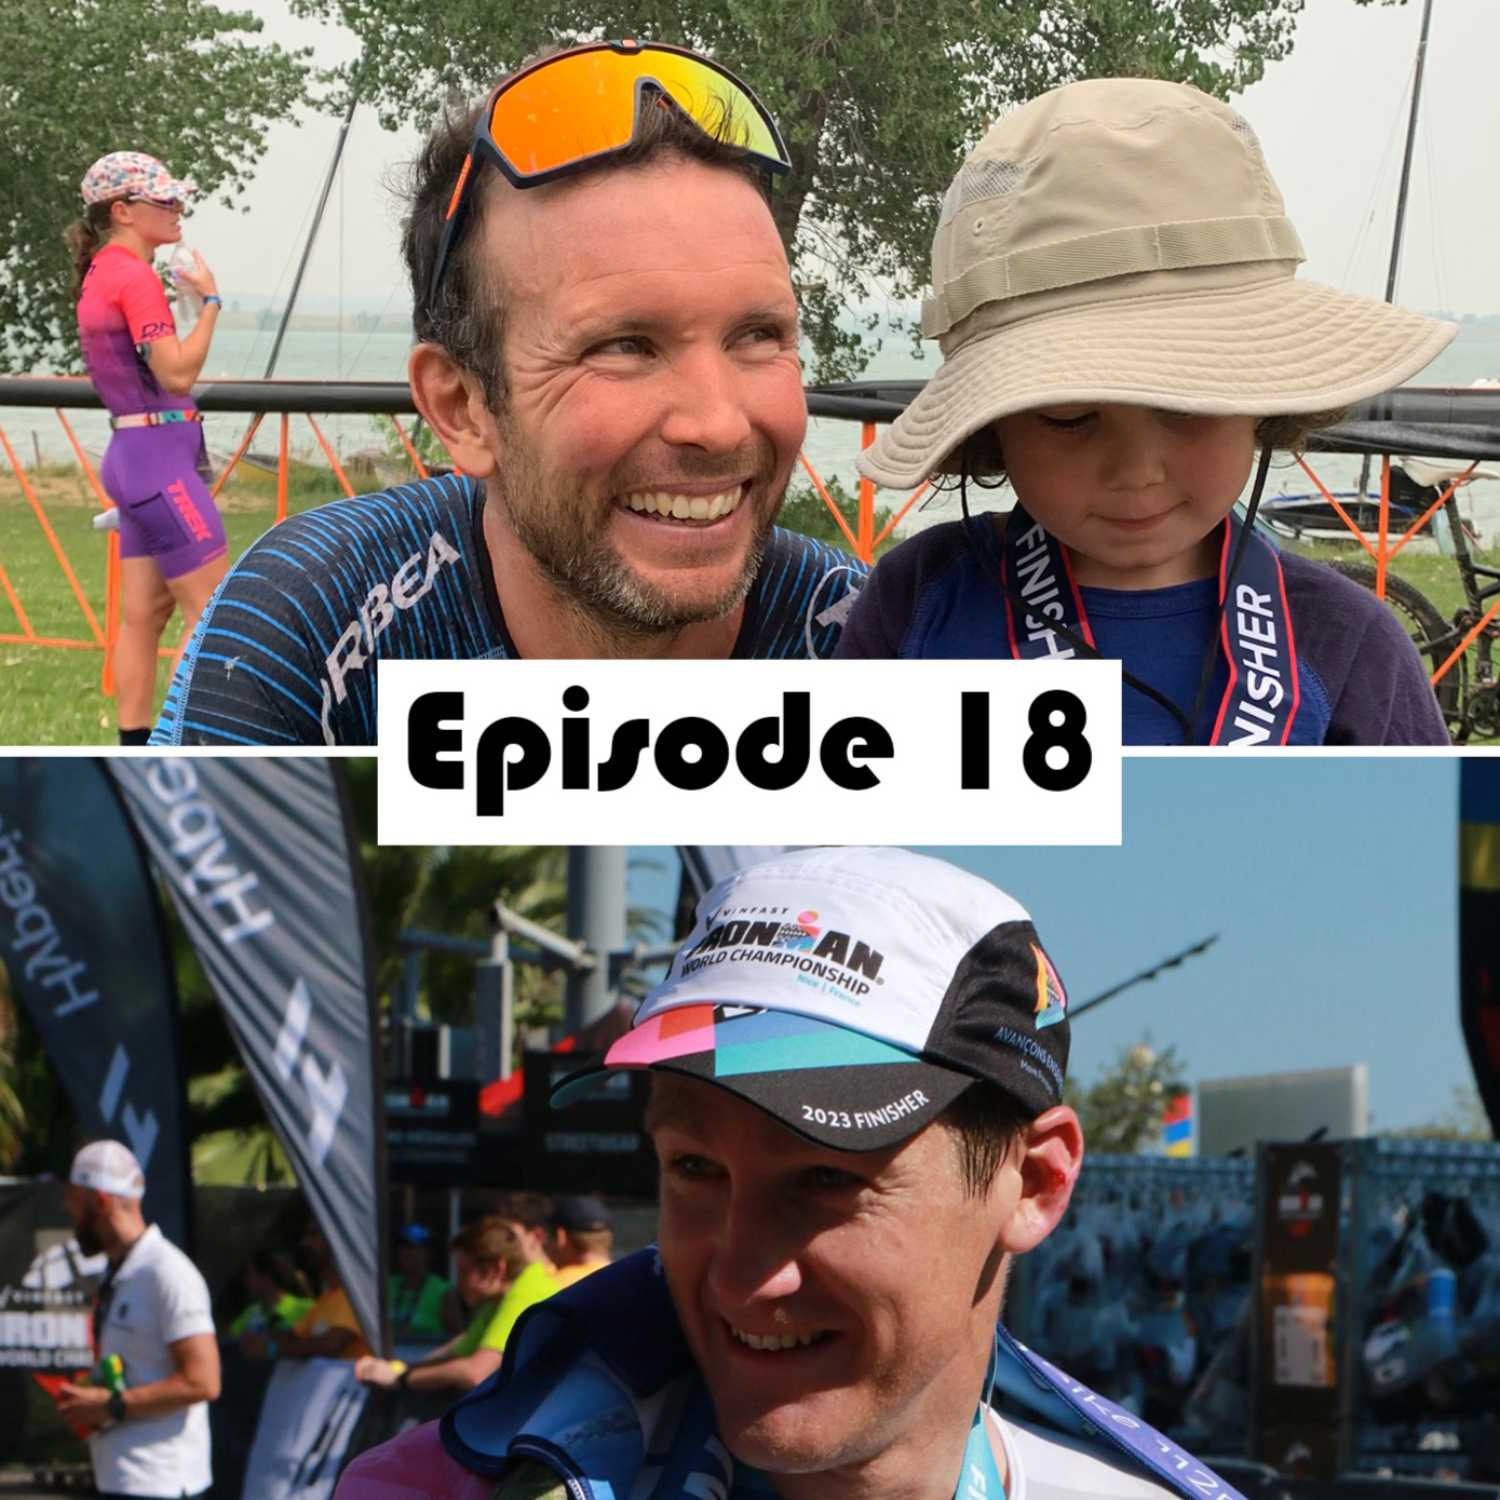 Joe Gambles chats Boulder, working with the Ironman commentary team, retirement, Sam Laidlow, Jan Frodeno, and Ben Hill discusses his 13th place in Ironman Nice, pro cycling career, being on Tadej Pog